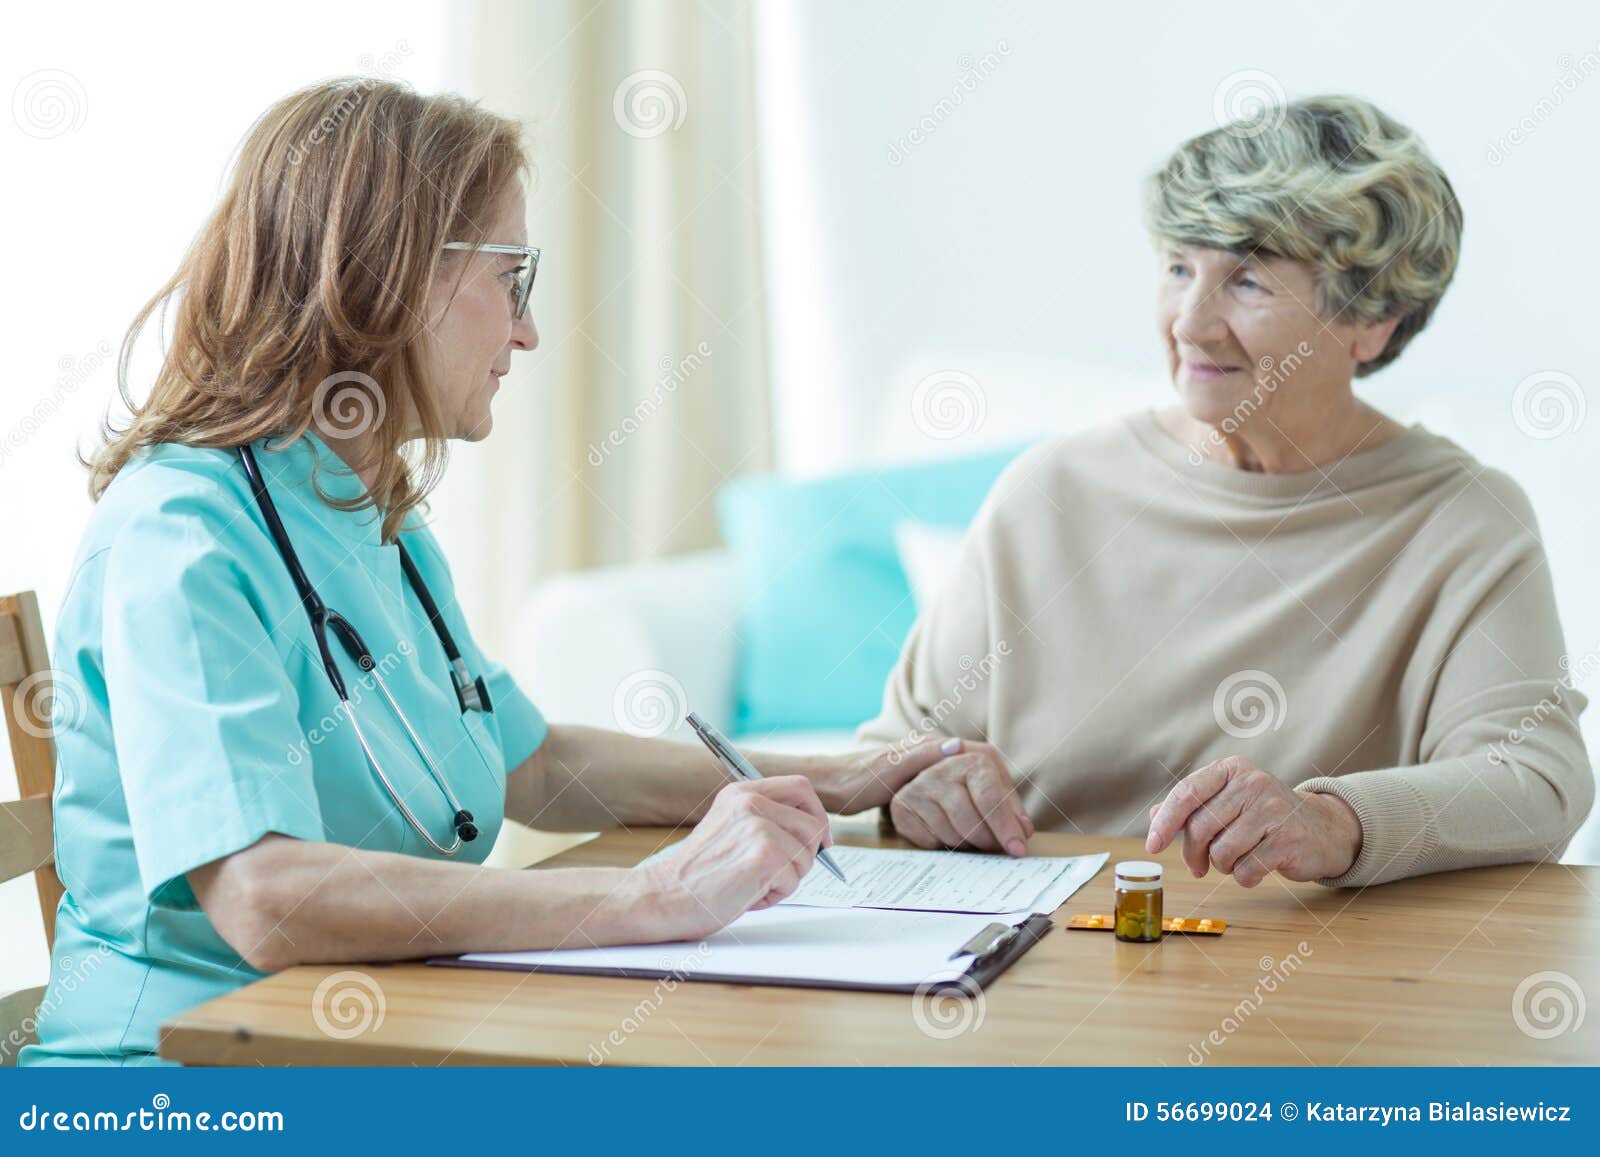 doctor on medical home appointment